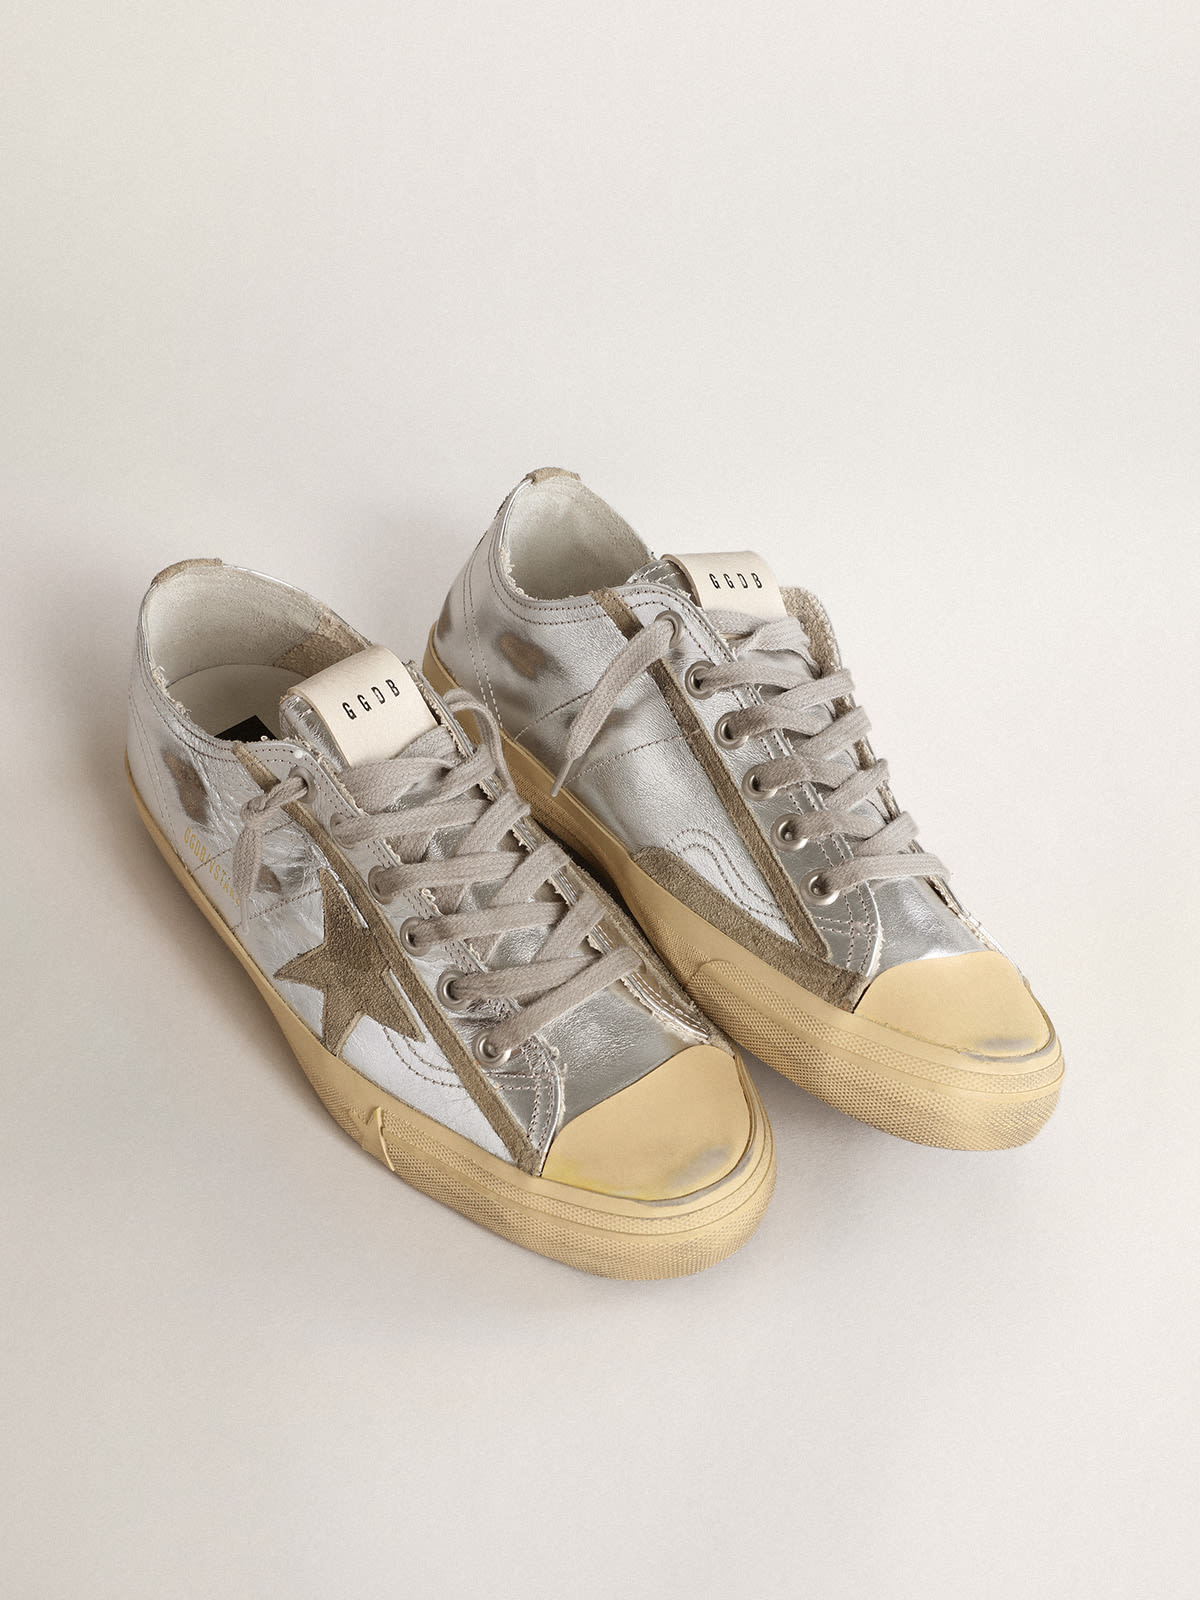 Golden Goose - Men’s V-Star LTD sneakers in silver metallic leather with star in ice-gray suede in 